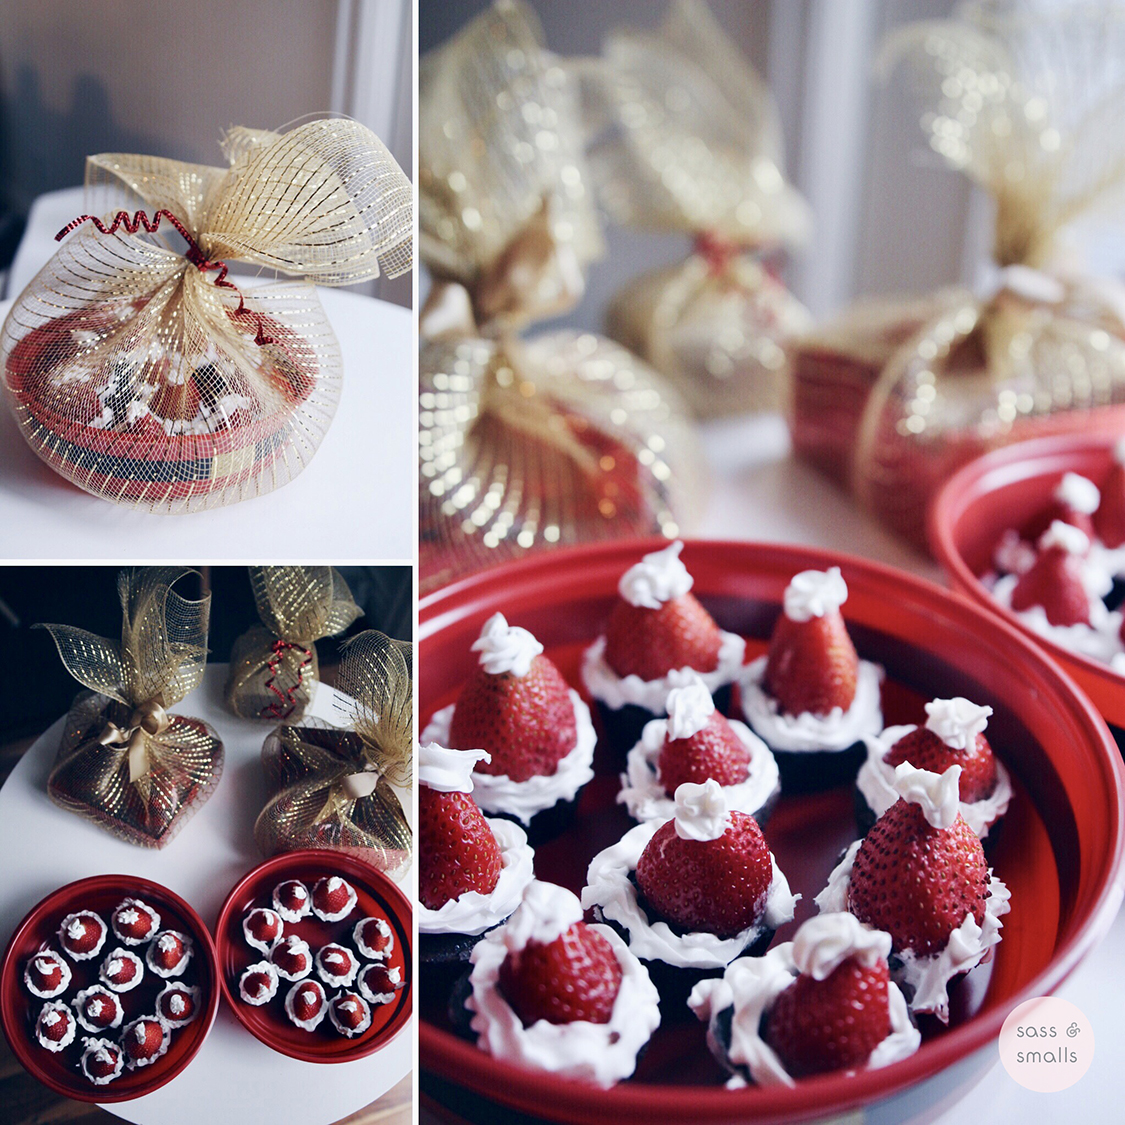 Santa Claus Theme Treats for Christmas Delivery :: The Gift of Giving www.sassandsmalls.com